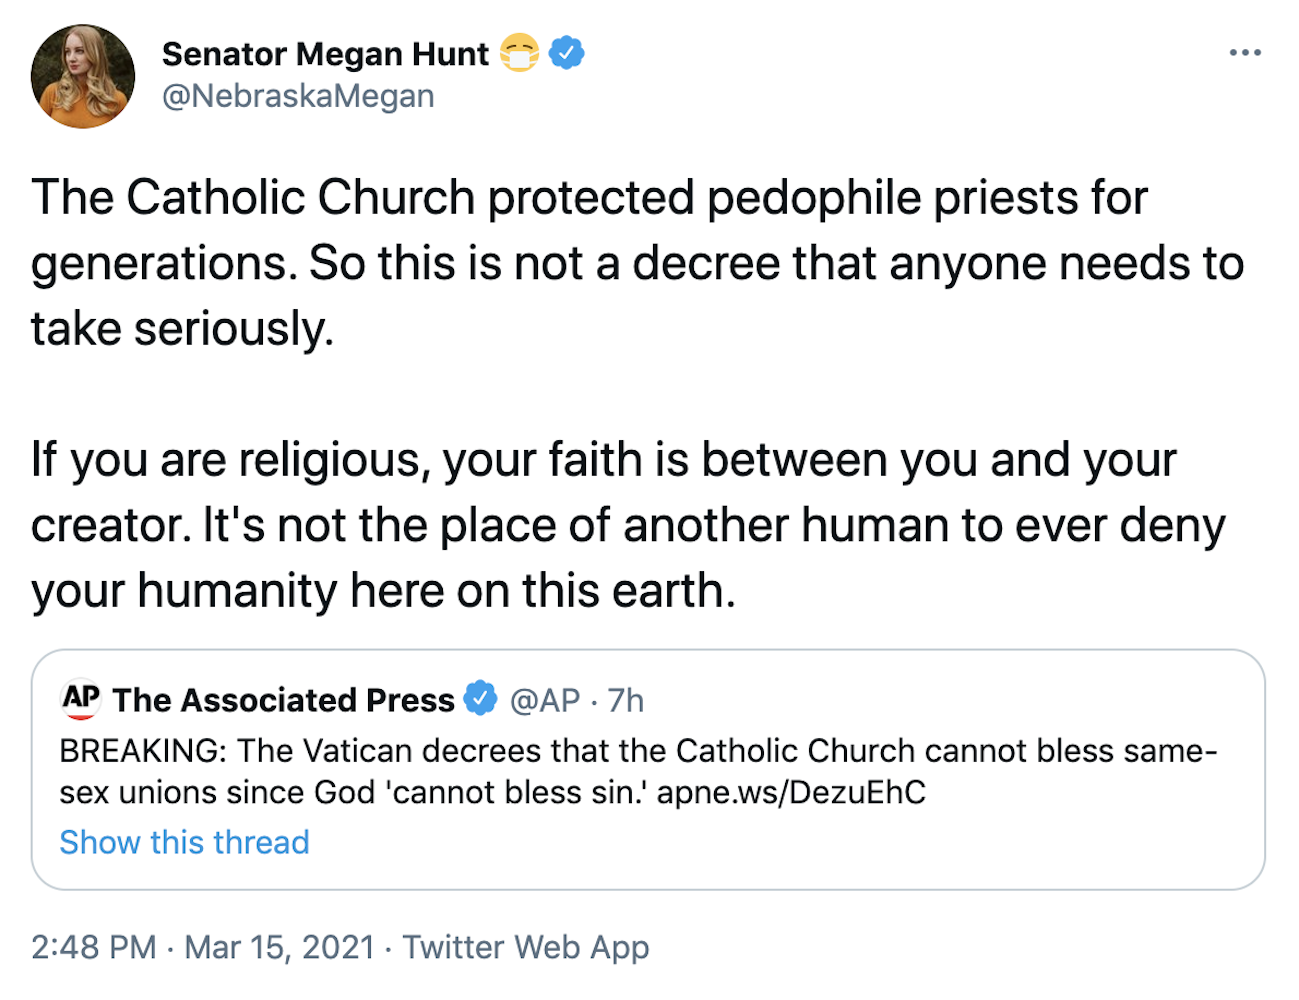 The Catholic Church protected pedophile priests for generations. So this is not a decree that anyone needs to take seriously.  If you are religious, your faith is between you and your creator. It's not the place of another human to ever deny your humanity here on this earth.